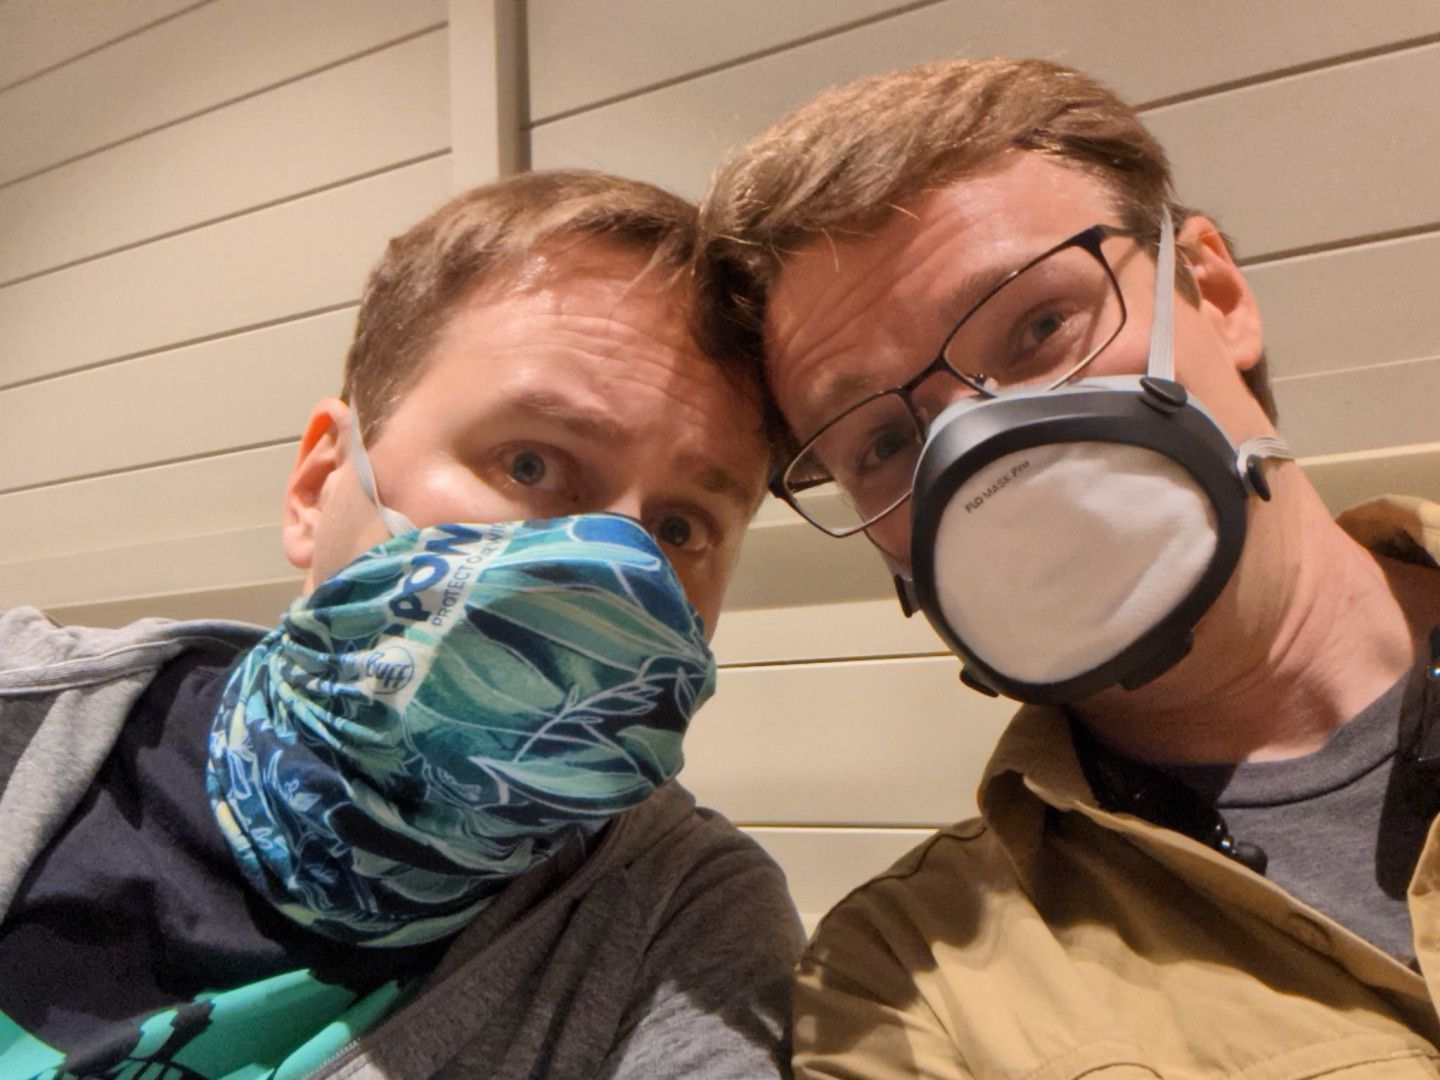 A photo of Josh and Chris leaning their heads together looking a mix of happy and concerned. They are indoors at the airport, wearing elastomeric masks.